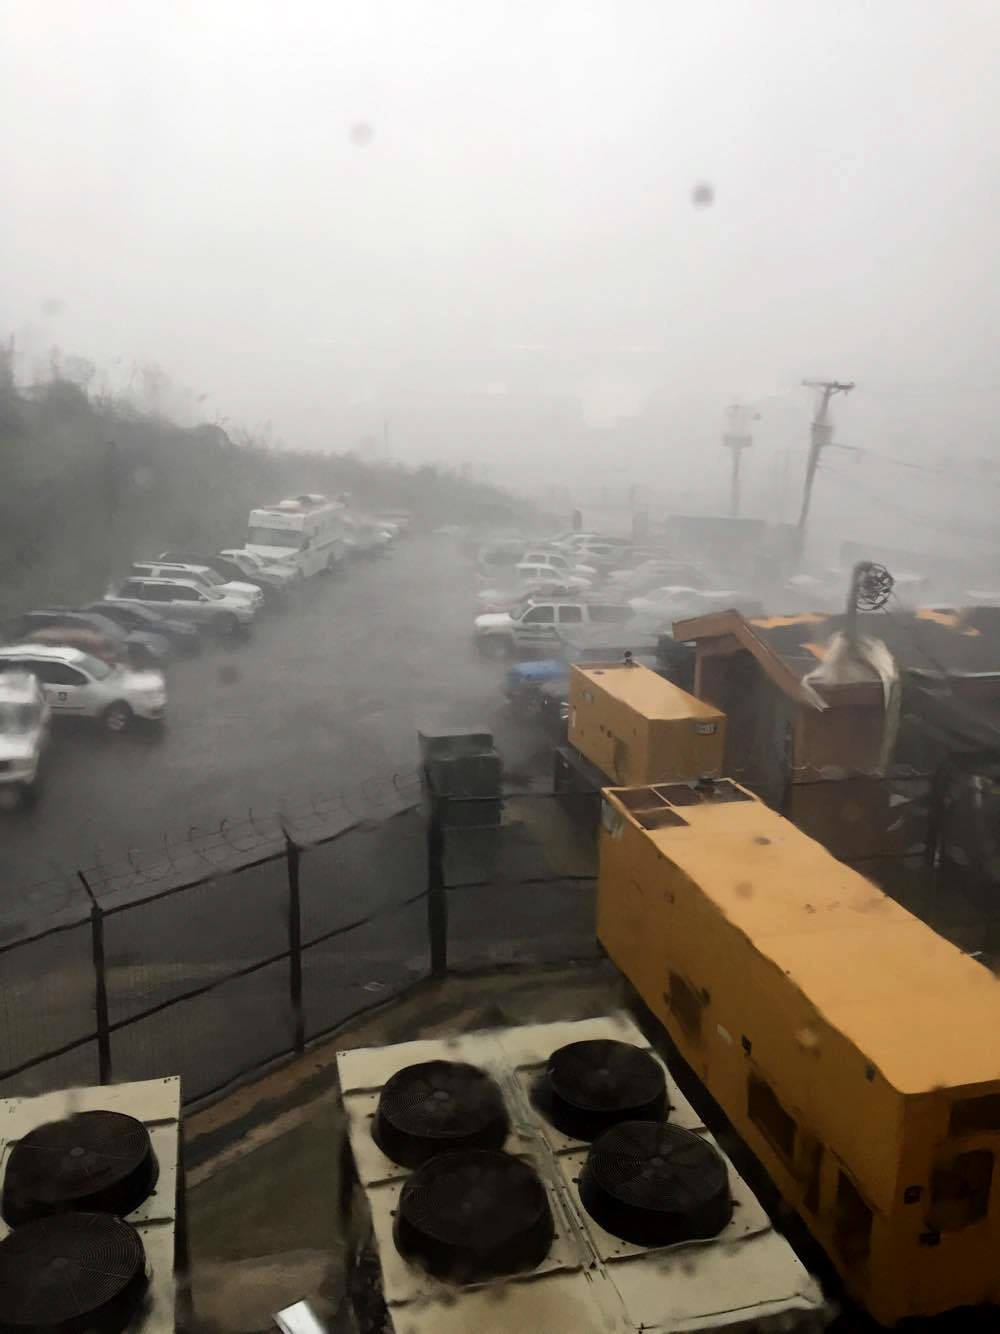 View from a window at the Virgin Islands territorial emergency management agency building in St. Thomas, U.S. Virgin Islands where the six-member team from the 269th Combat Communications Squadron, Springfield Ohio Air National Guard Base sought shelter d